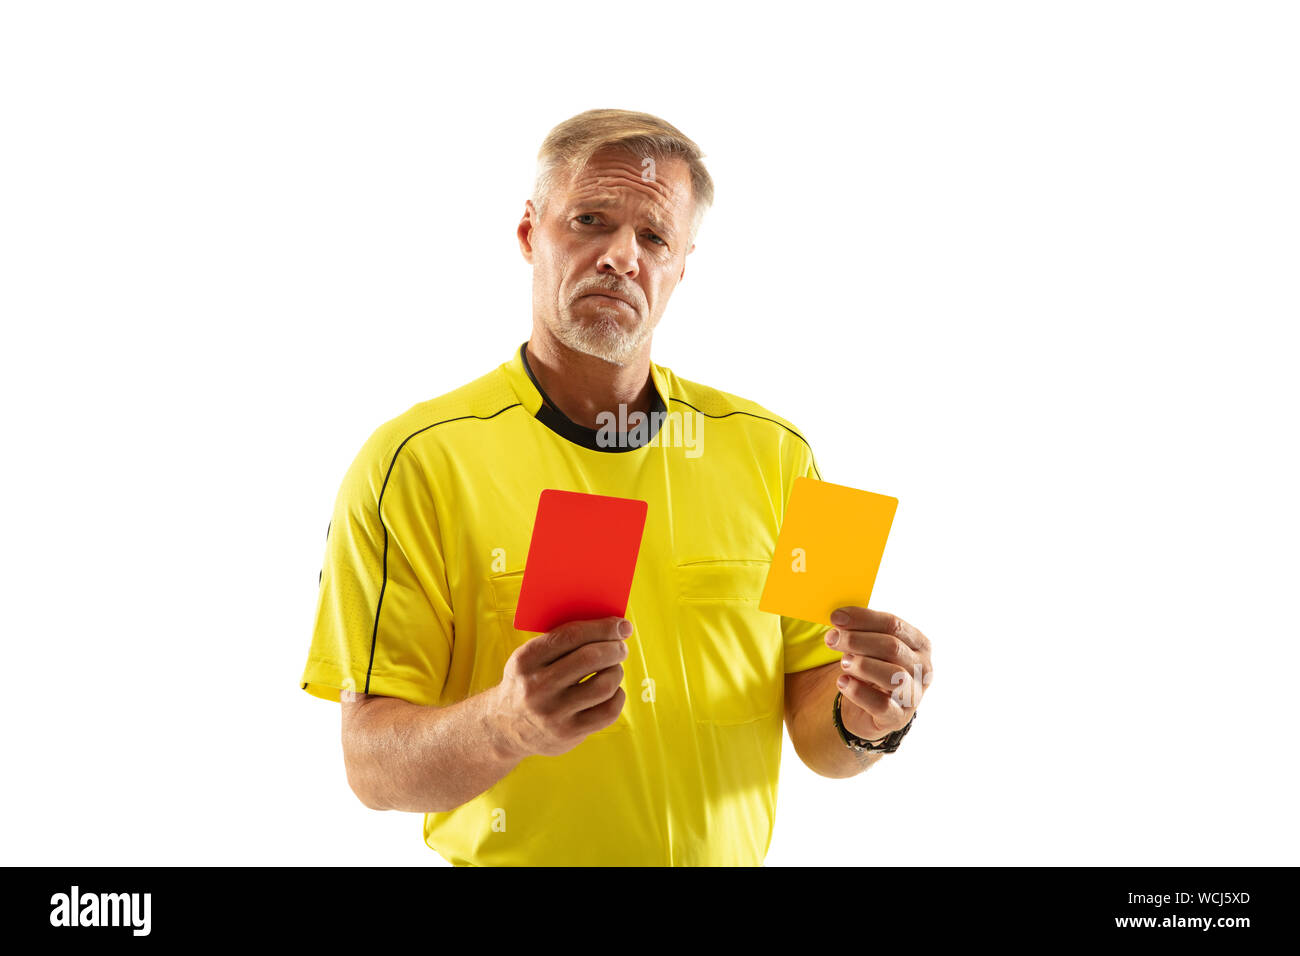 2,700 Referee Holding Red Card Images, Stock Photos, 3D objects, & Vectors